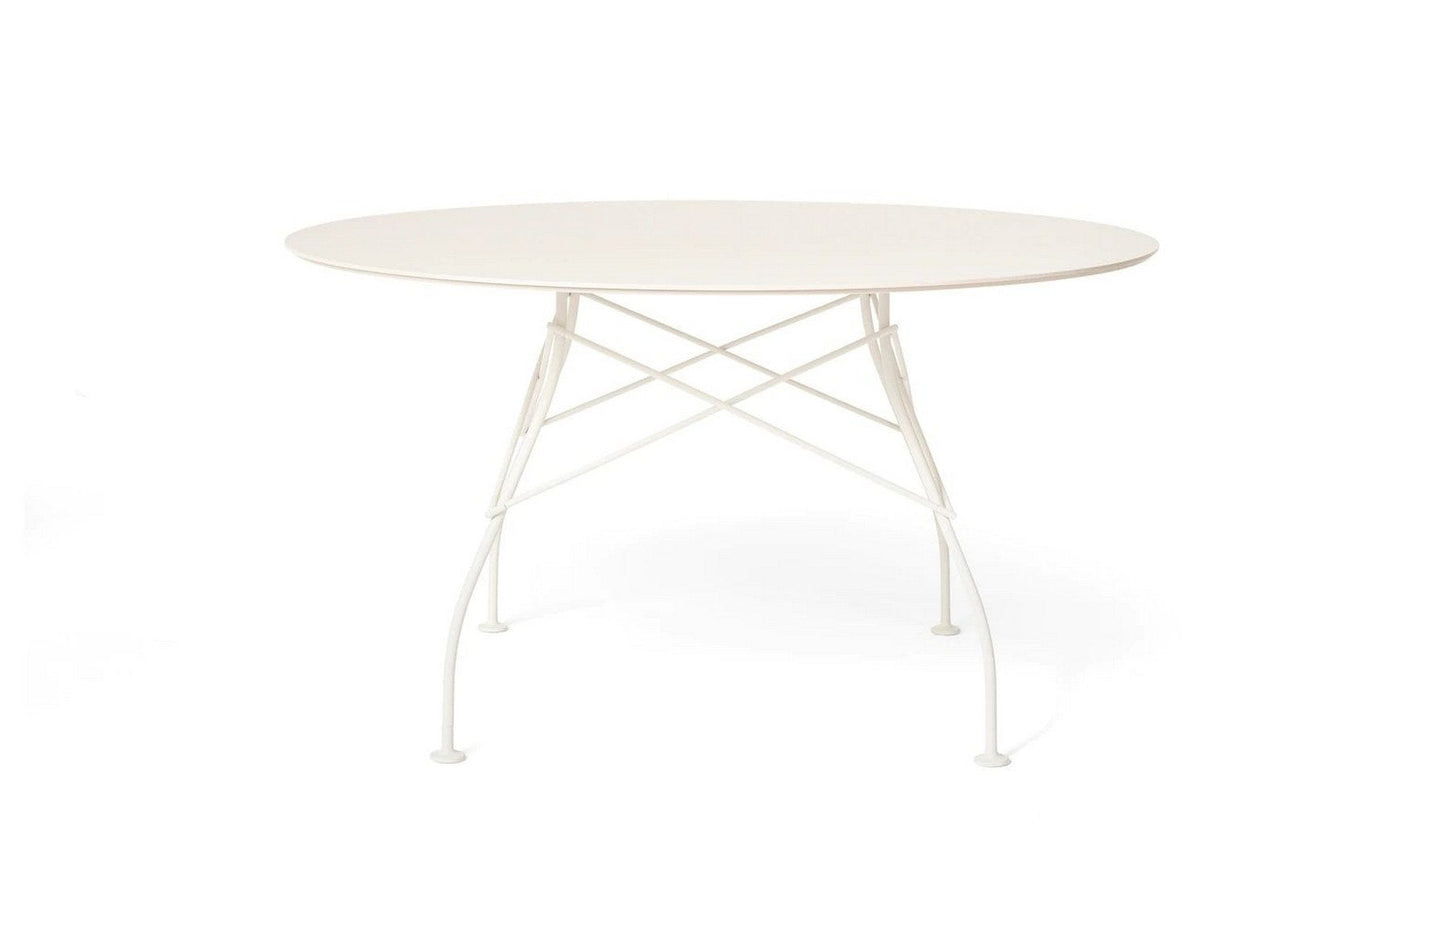 Glossy Outdoor Round Table - Stoneware
